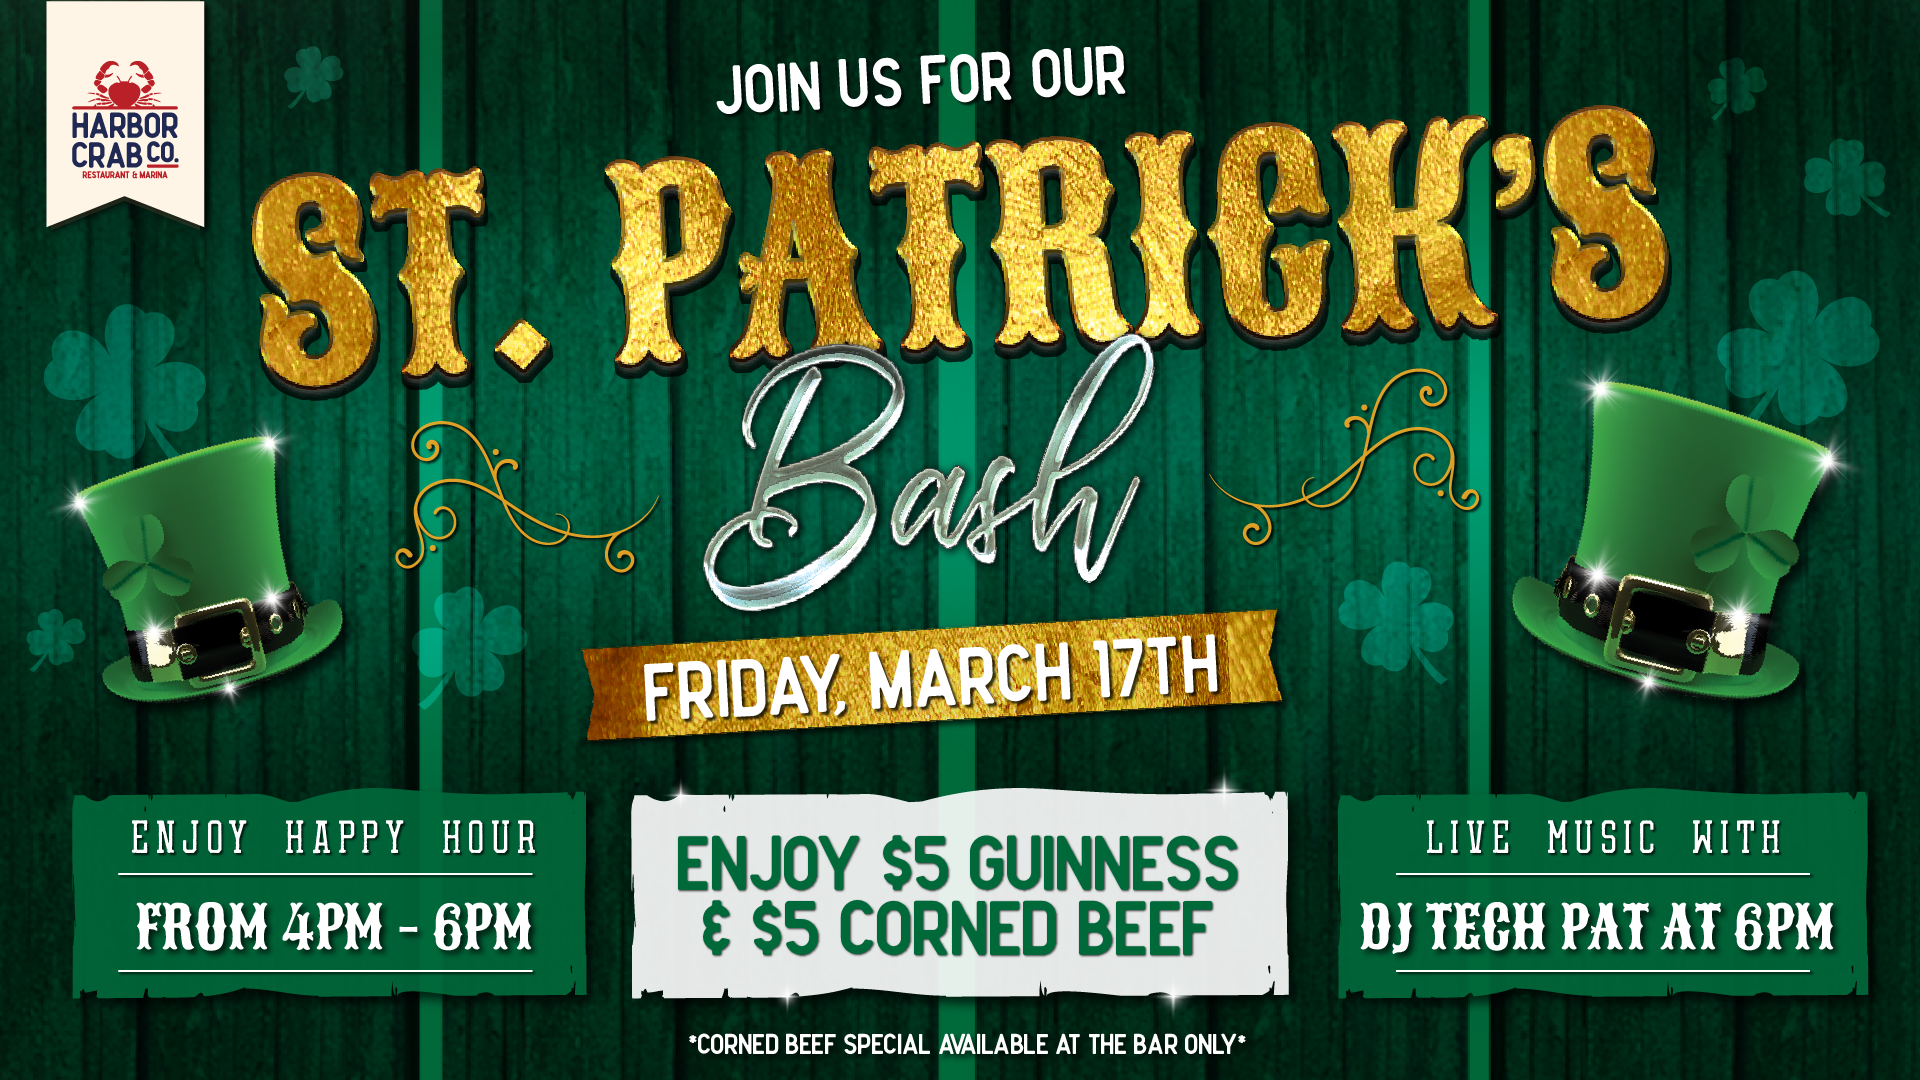 St. Patrick's Bash on March 17th, 2023